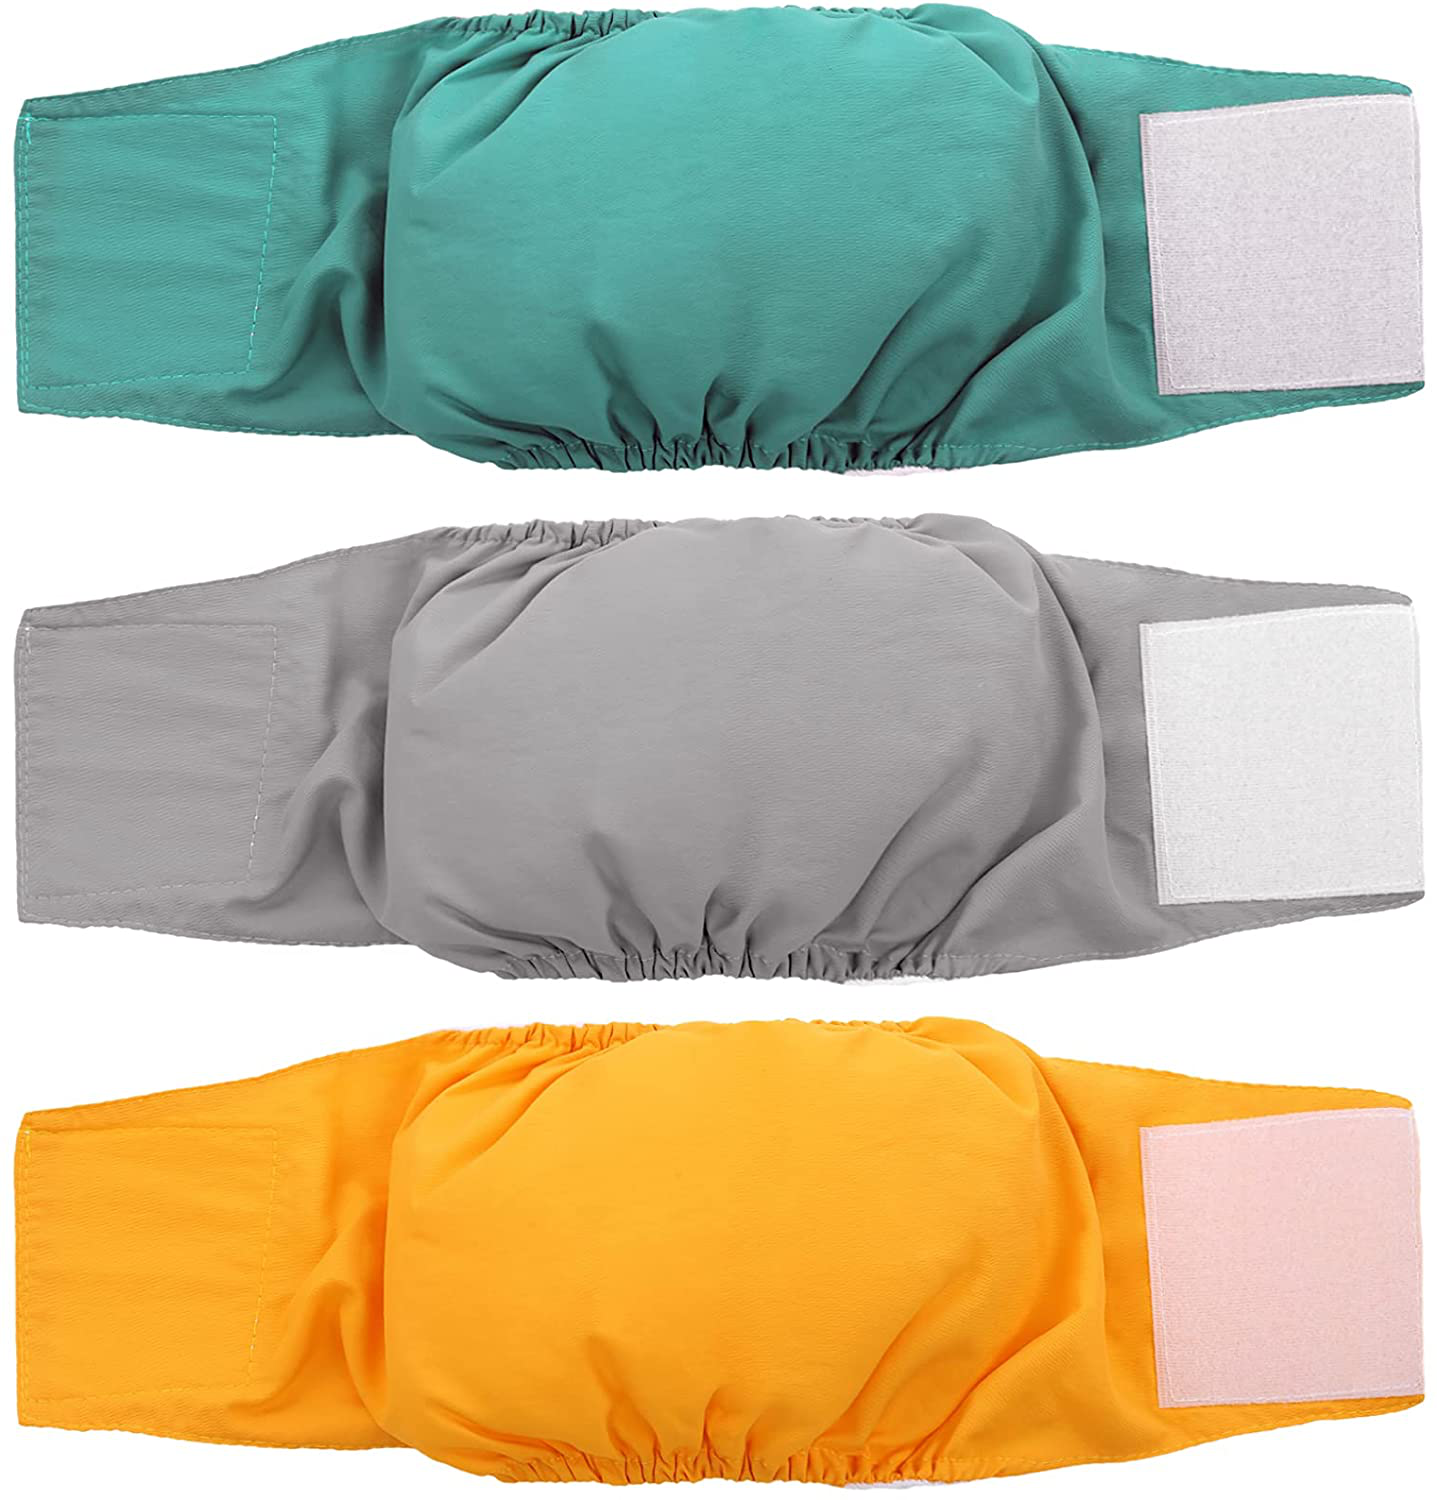 FUAMEY Reusable Dog Diapers for Male Dogs, 3 Pack Washable Belly Bands Puppy Nappies Wrap, Highly Absorbent Doggie Diaper for Small Medium Dogs Animals & Pet Supplies > Pet Supplies > Dog Supplies > Dog Diaper Pads & Liners FUAMEY Large  